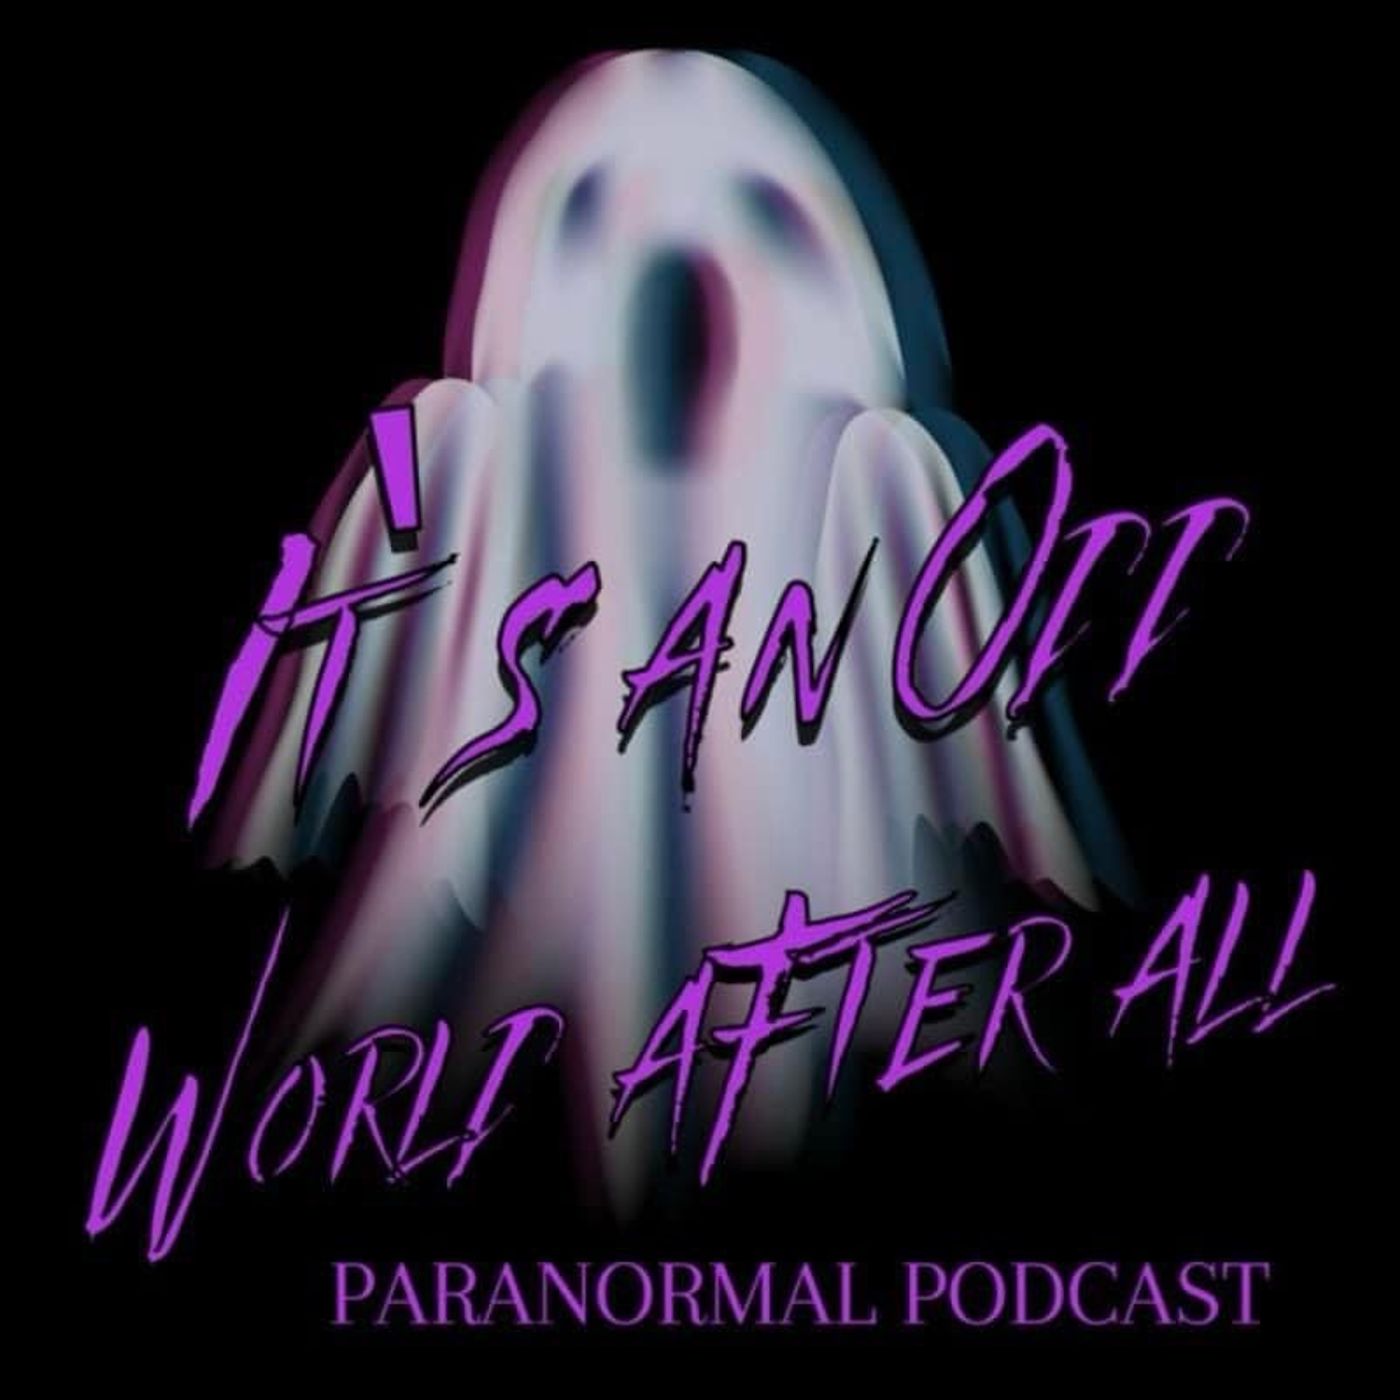 164: Guest Chat with Jensen (Paranormal Investigator and Host of 